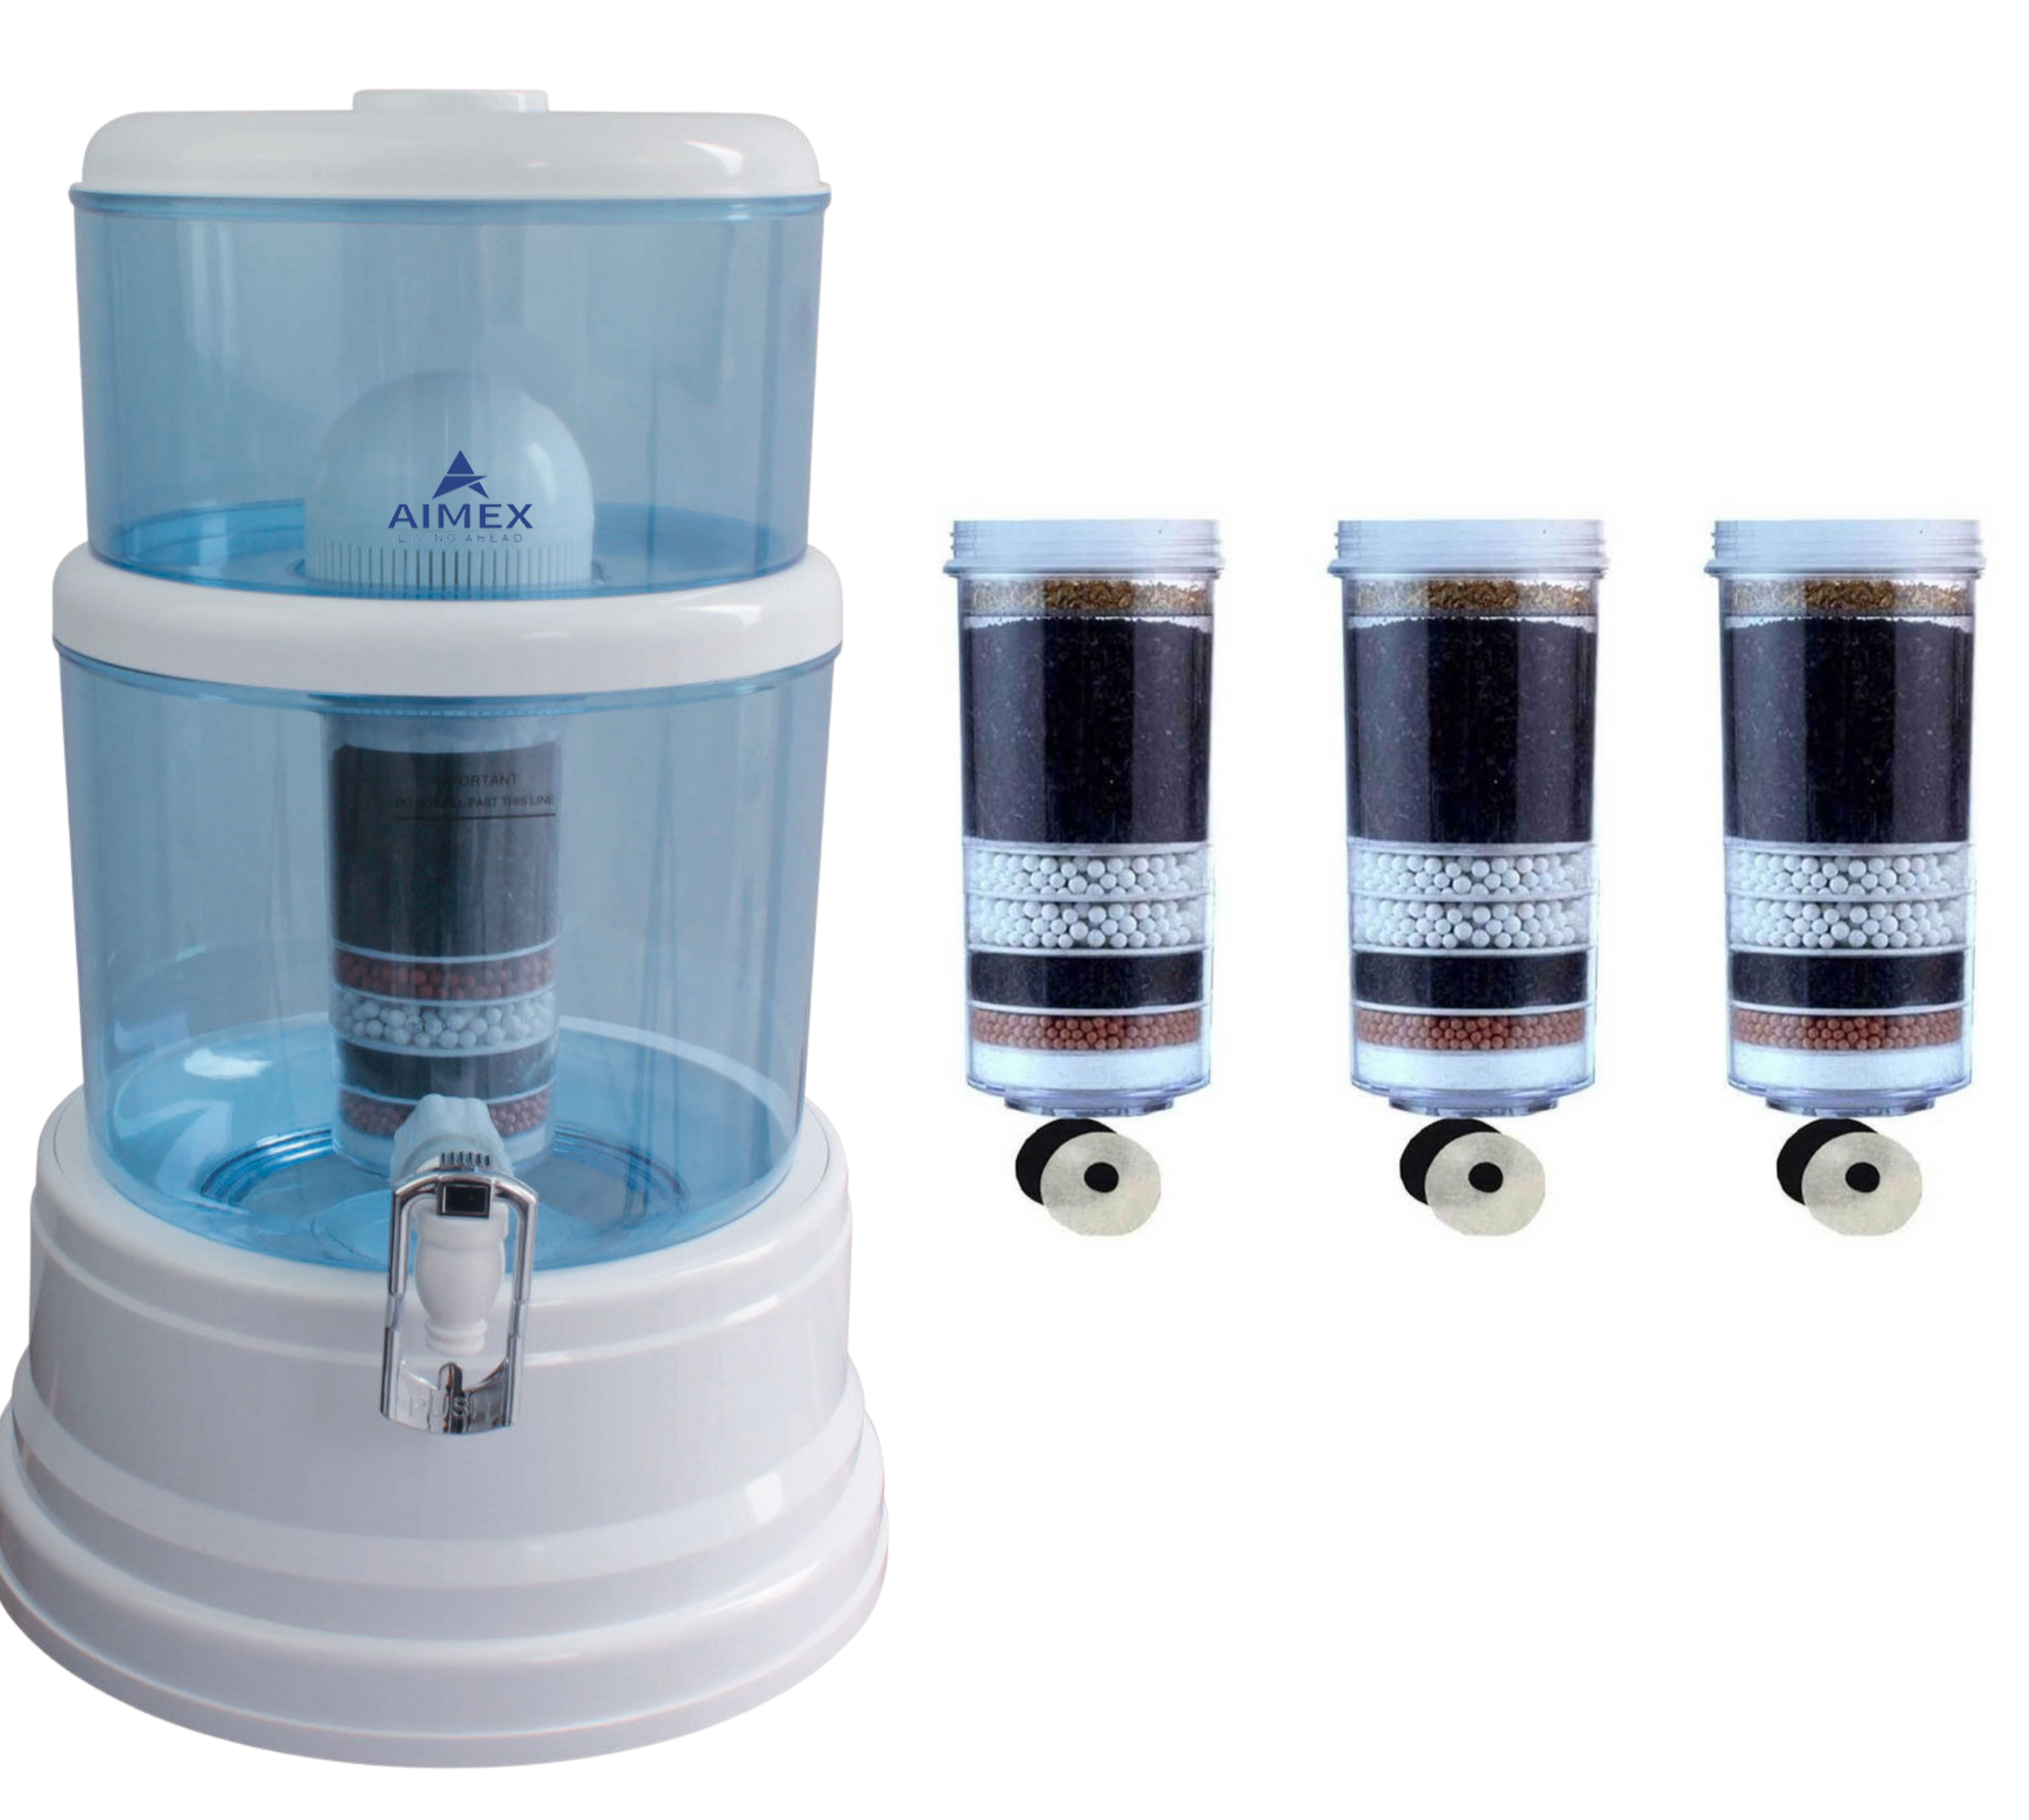 AIMEX WATER DISPENSER 16L BENCHTOP PURIFIER WITH 3 x 8 STAGE FLUORIDE REMOVAL FILTERS